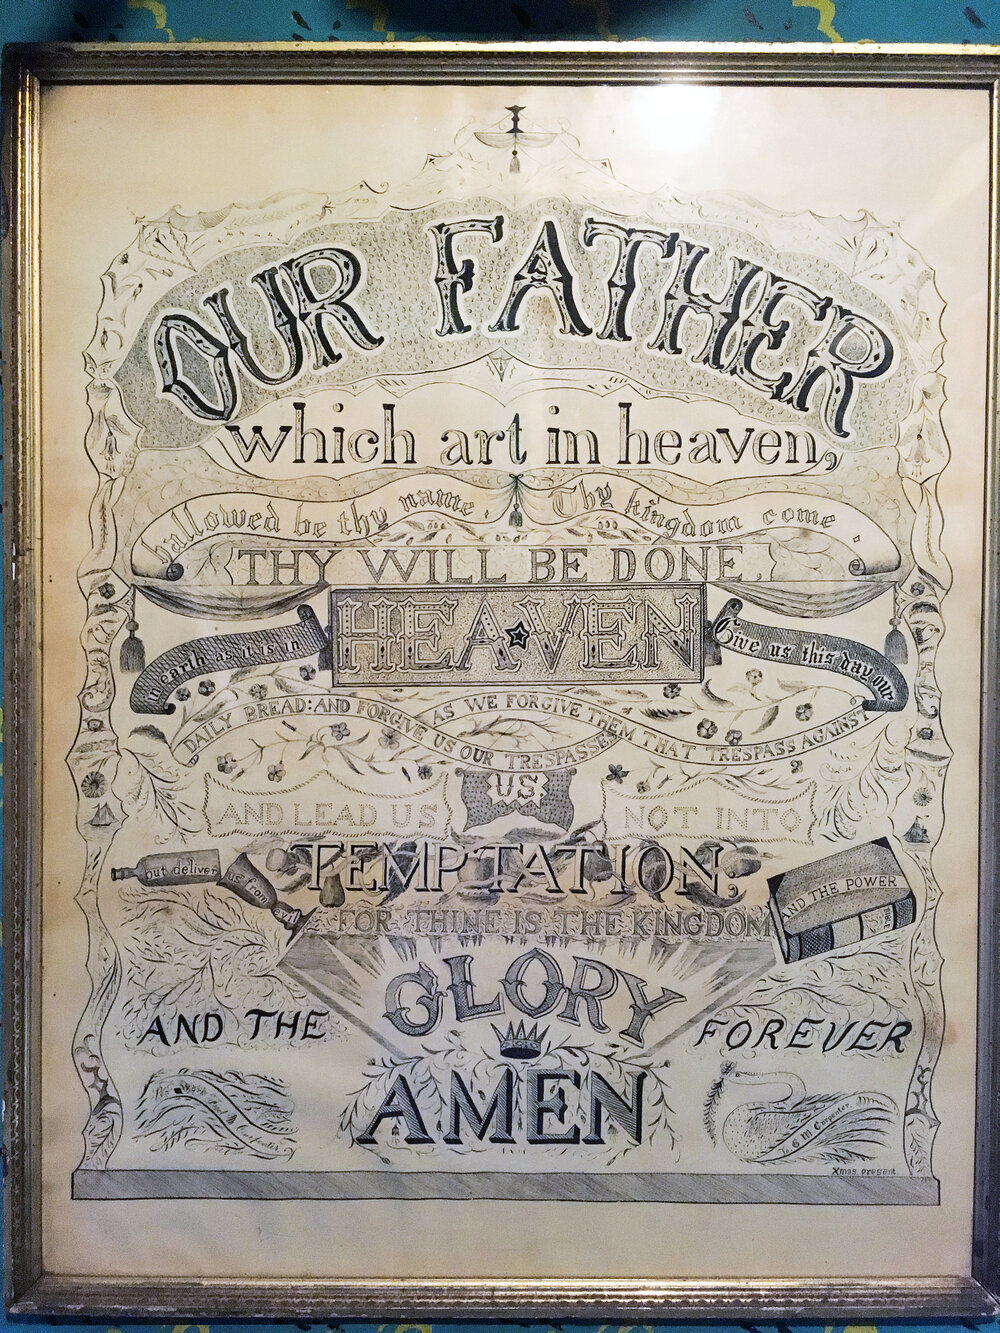 Early Masonic Calligraphy Broadside (part of Brian's collection in his painted room)